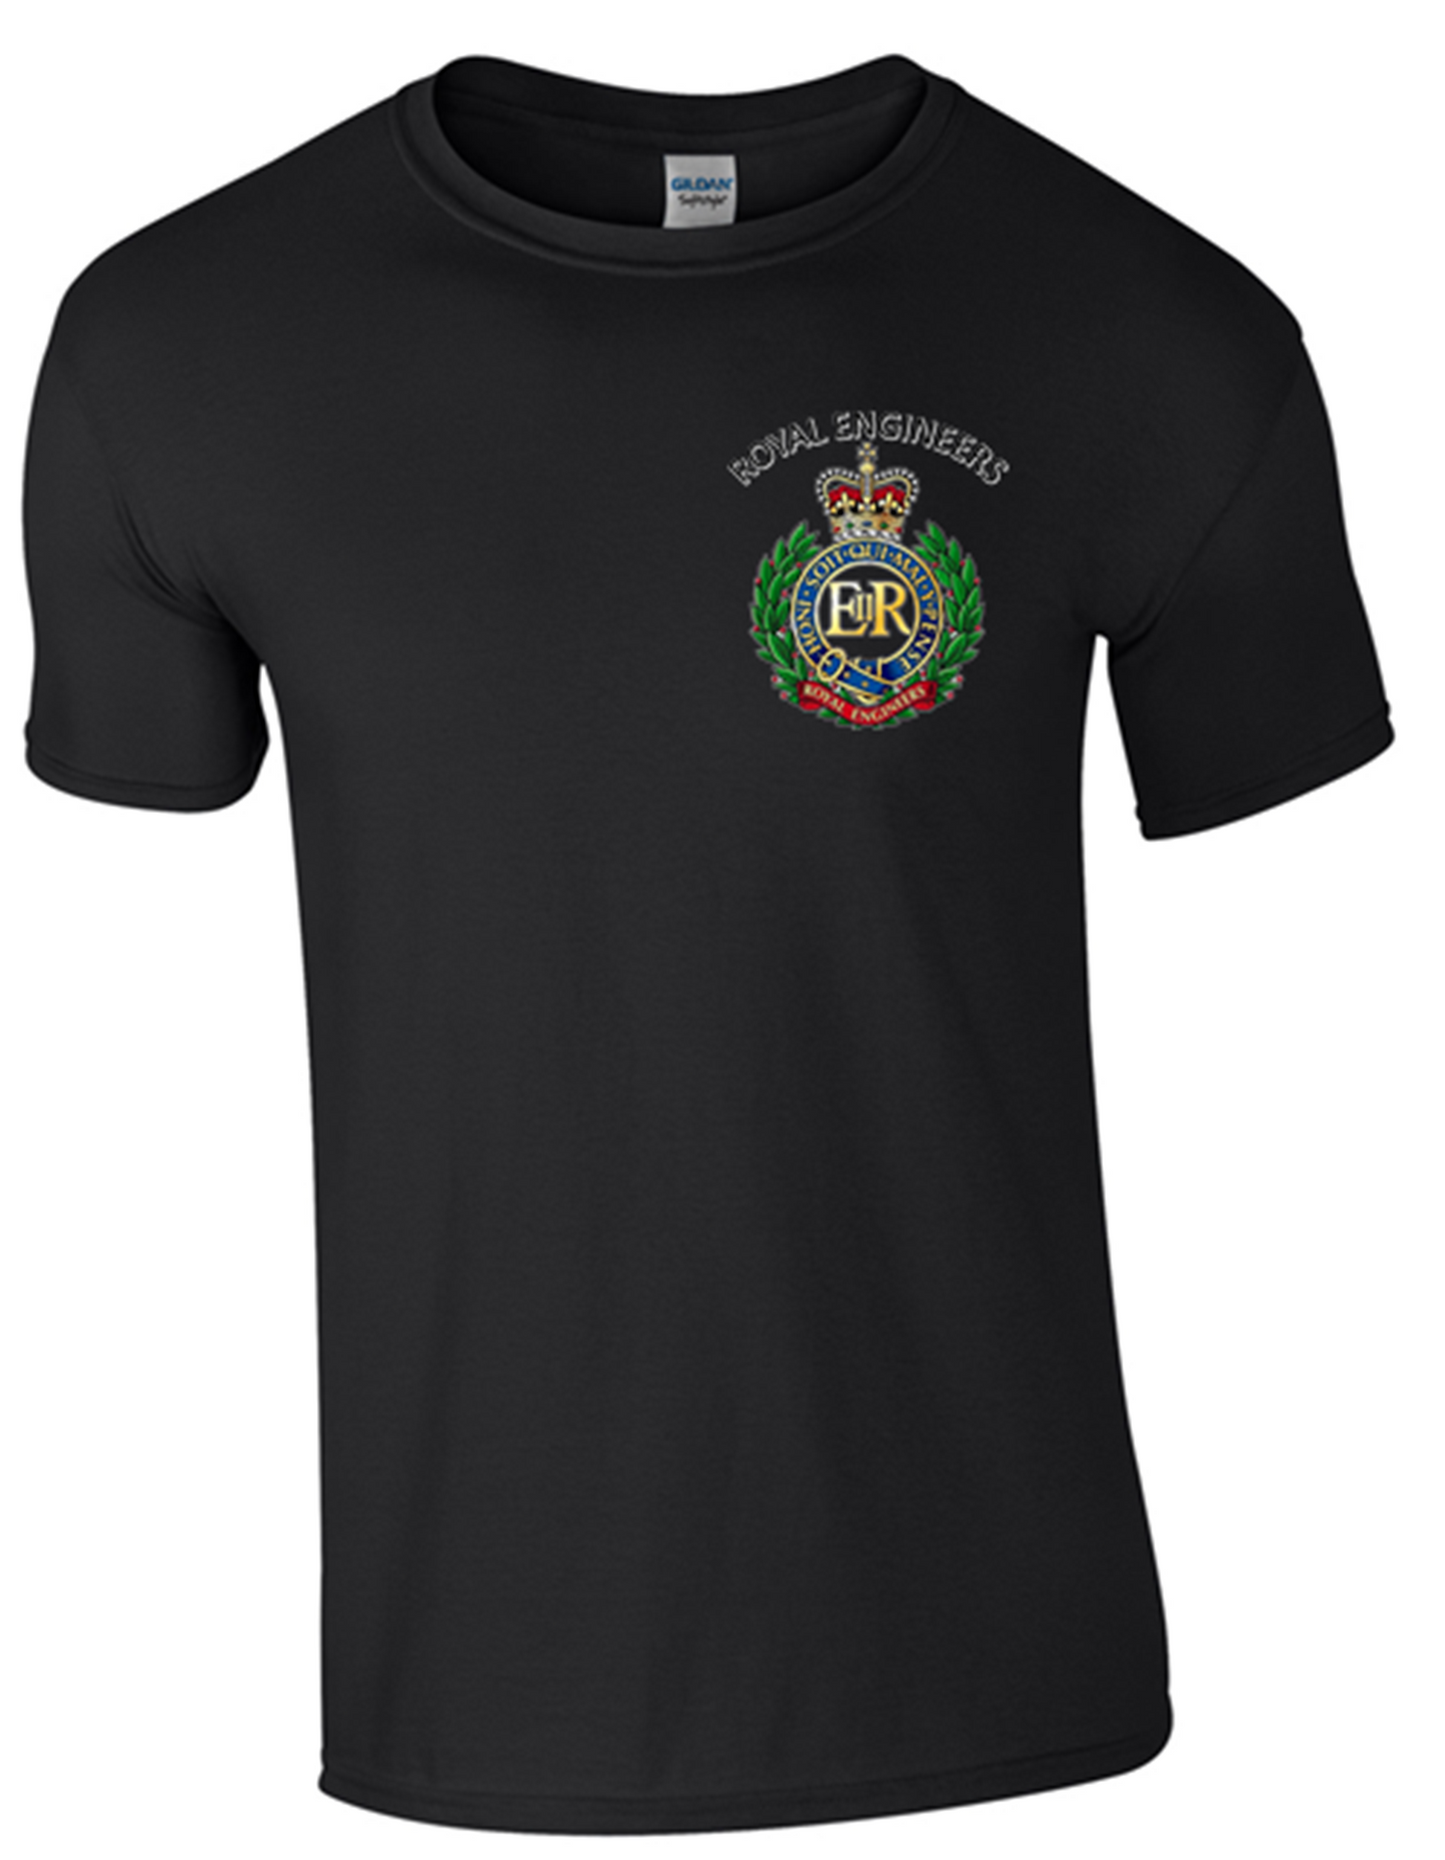 Royal Engineers T-Shirt Front Logo only Official MOD Approved Merchandise - Army 1157 kit Army 1157 Kit Veterans Owned Business